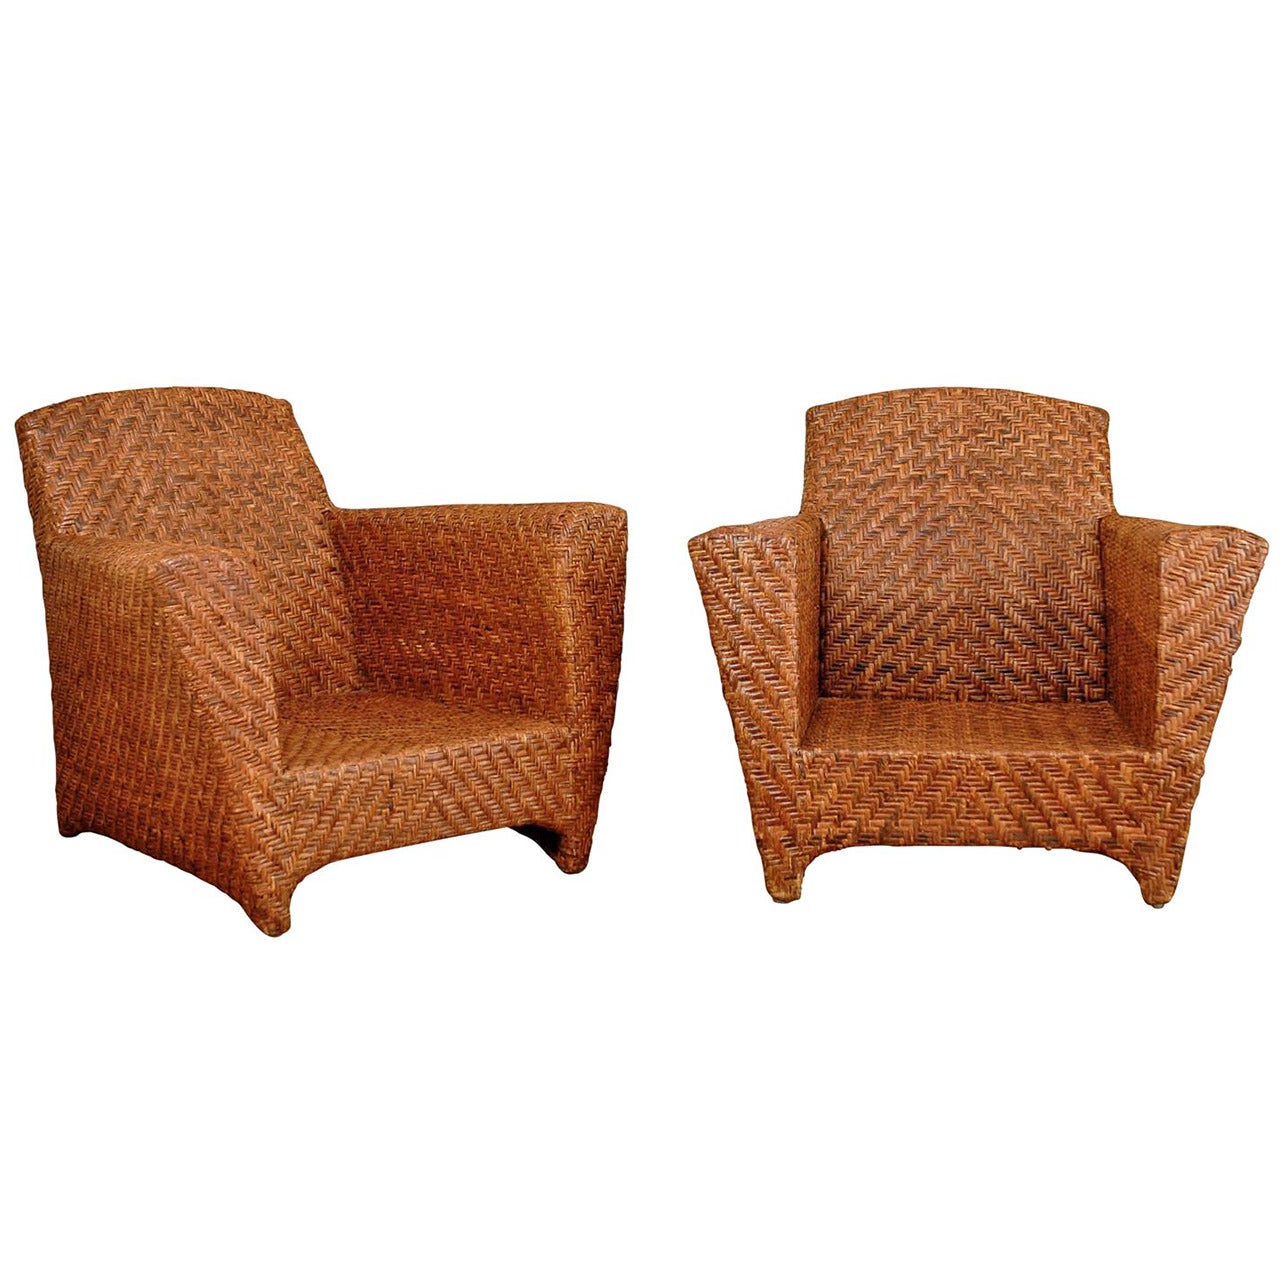 Handsome Pair of Vintage Rattan Club Chairs